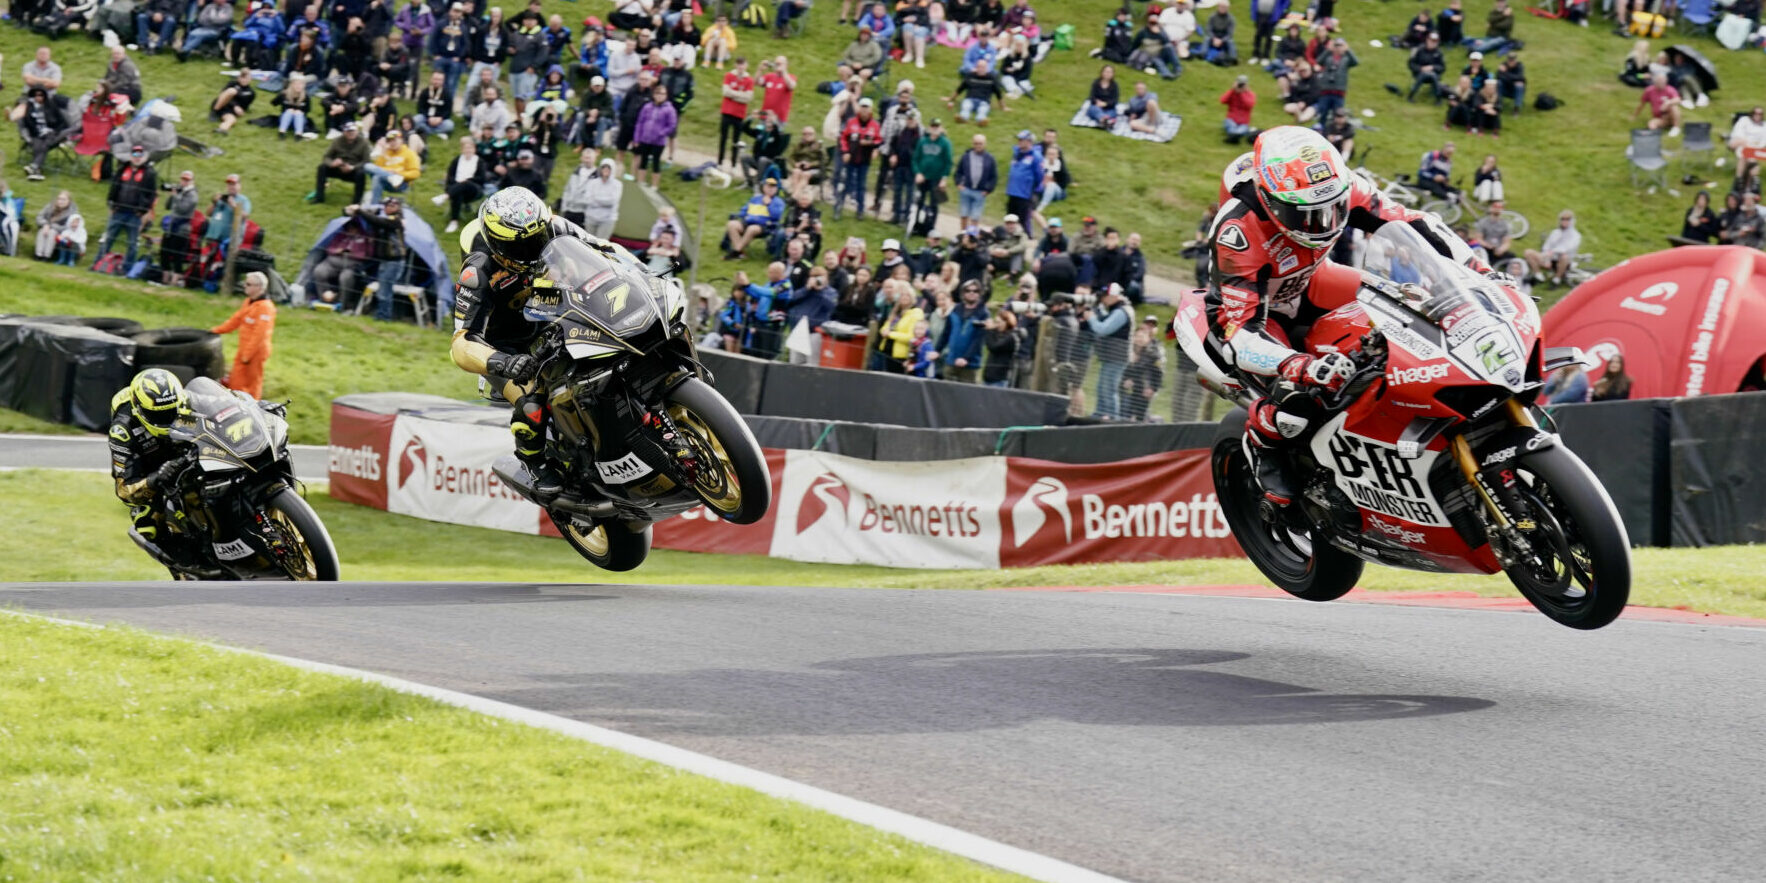 Glenn Irwin (2) leads Ryan Vickers (7) and Kyle Ryde (77) during Race One at Cadwell Park. Photo courtesy MSVR.